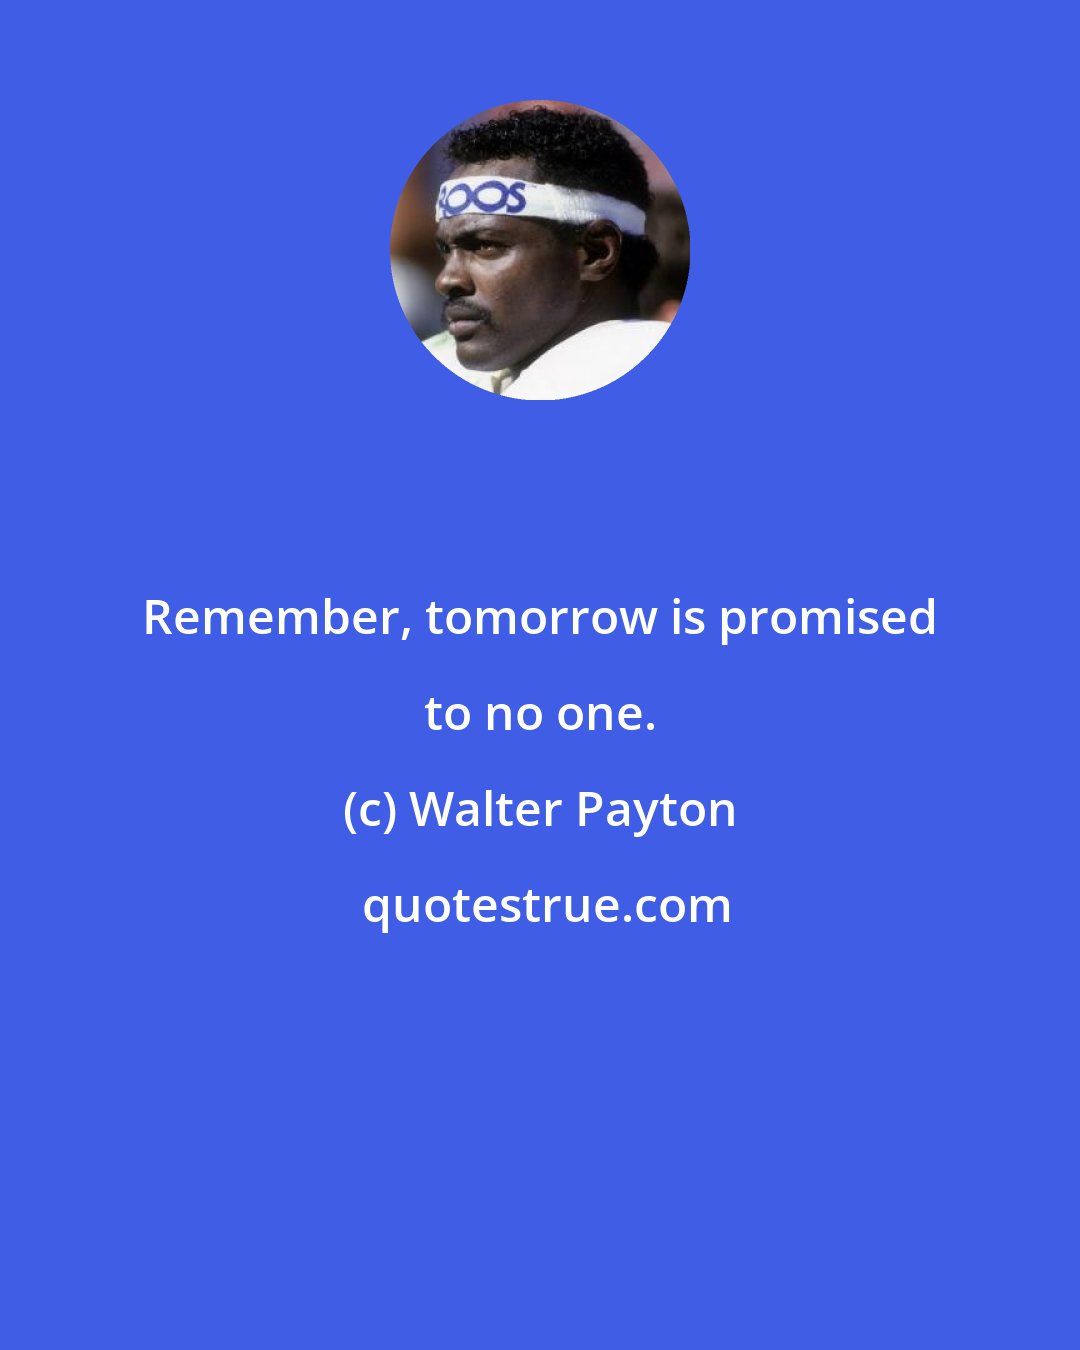 Walter Payton: Remember, tomorrow is promised to no one.